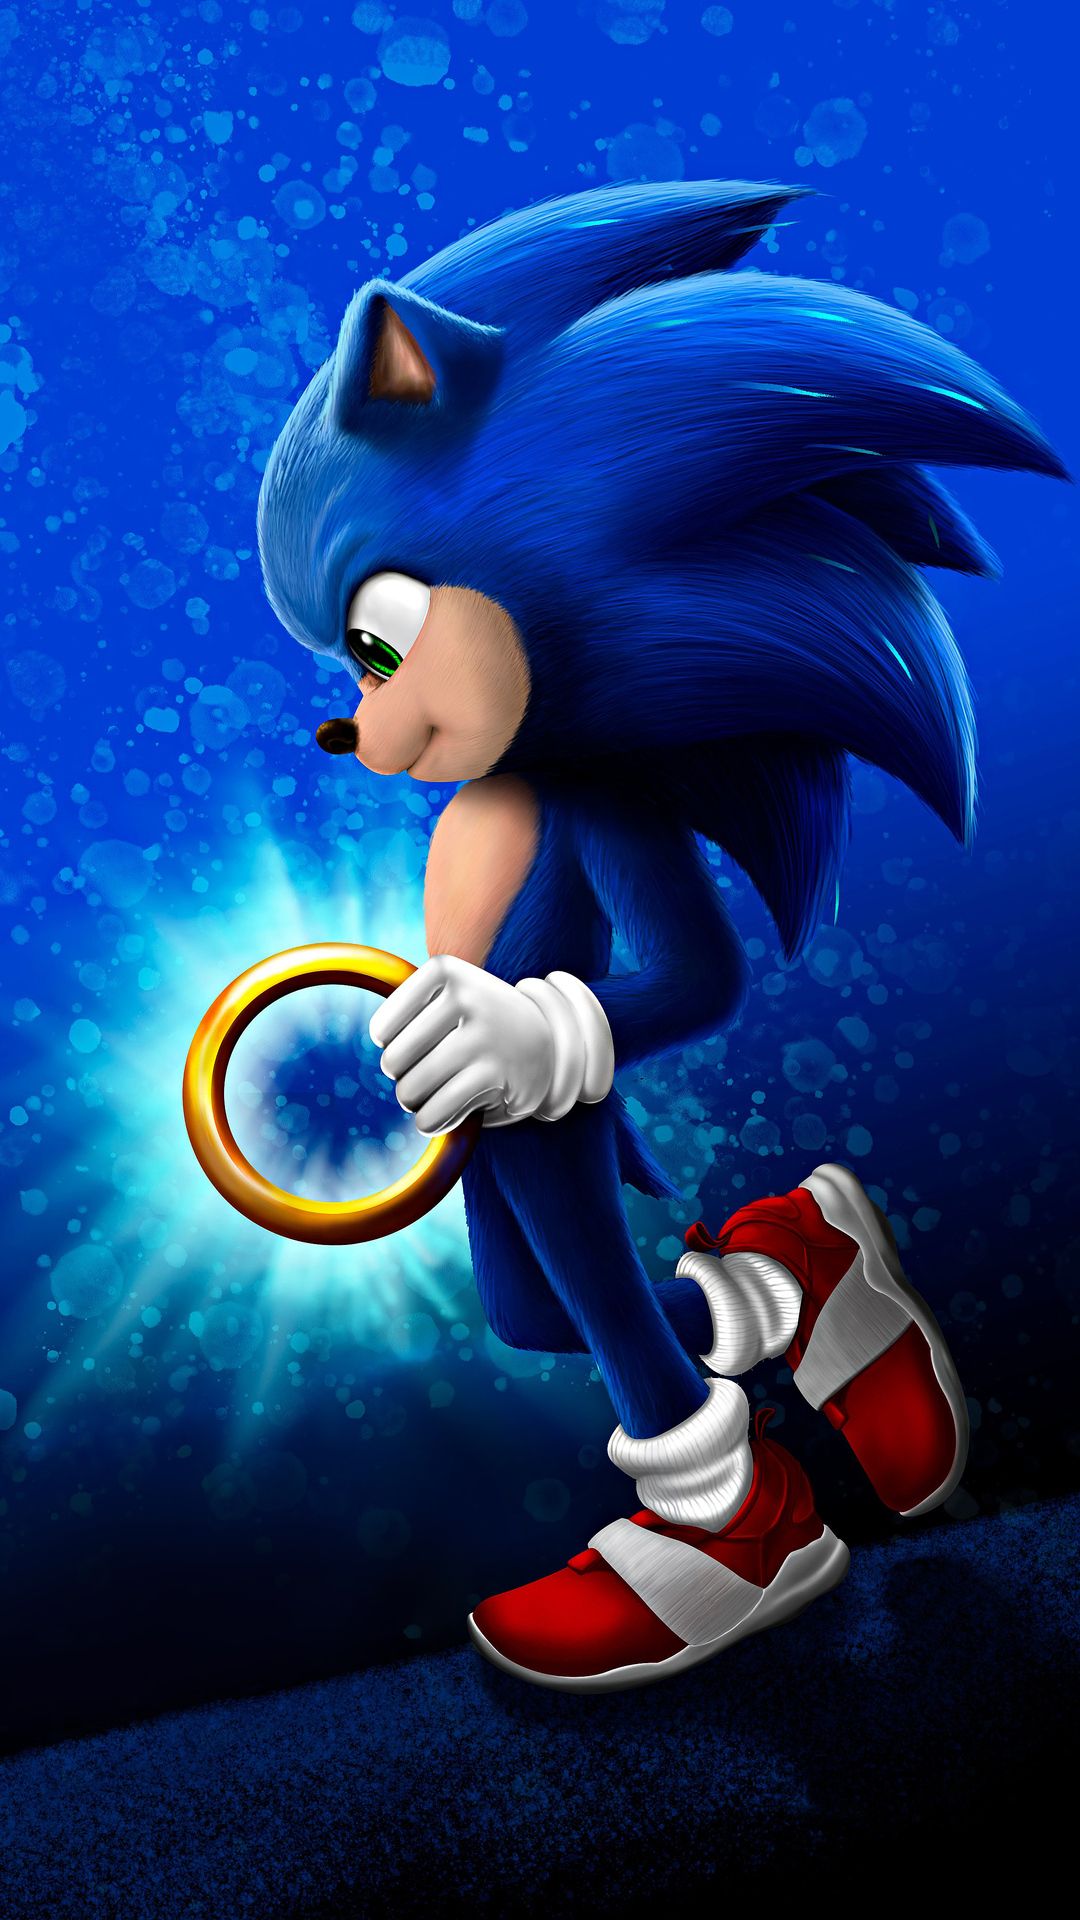 Sonic The Hedgehog Wallpaper Sonic The Hedgehog Background, Image & Photo